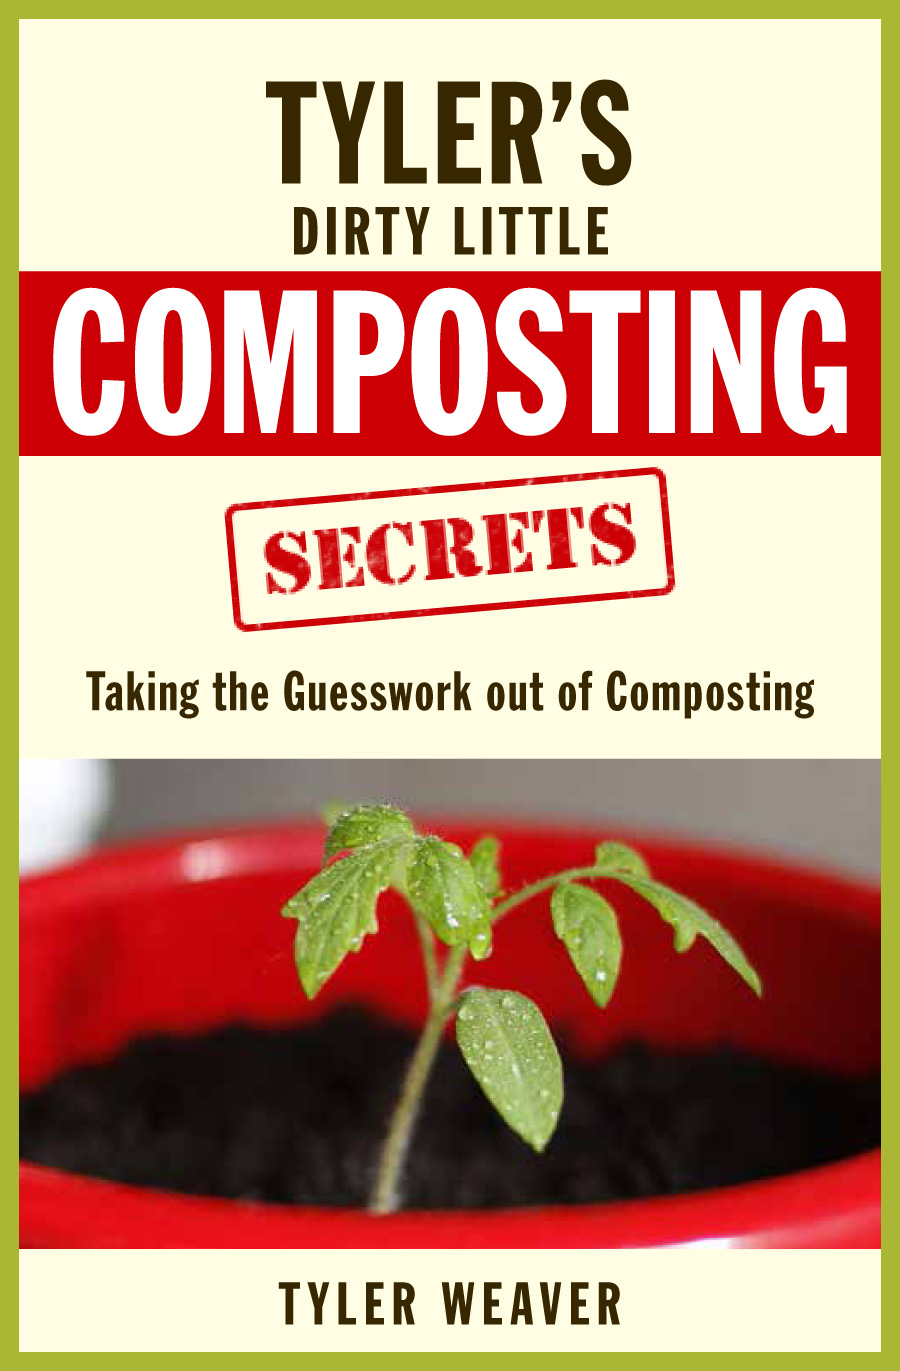 Tyler's-Dirty-Little-Composting-Secrets-Cover